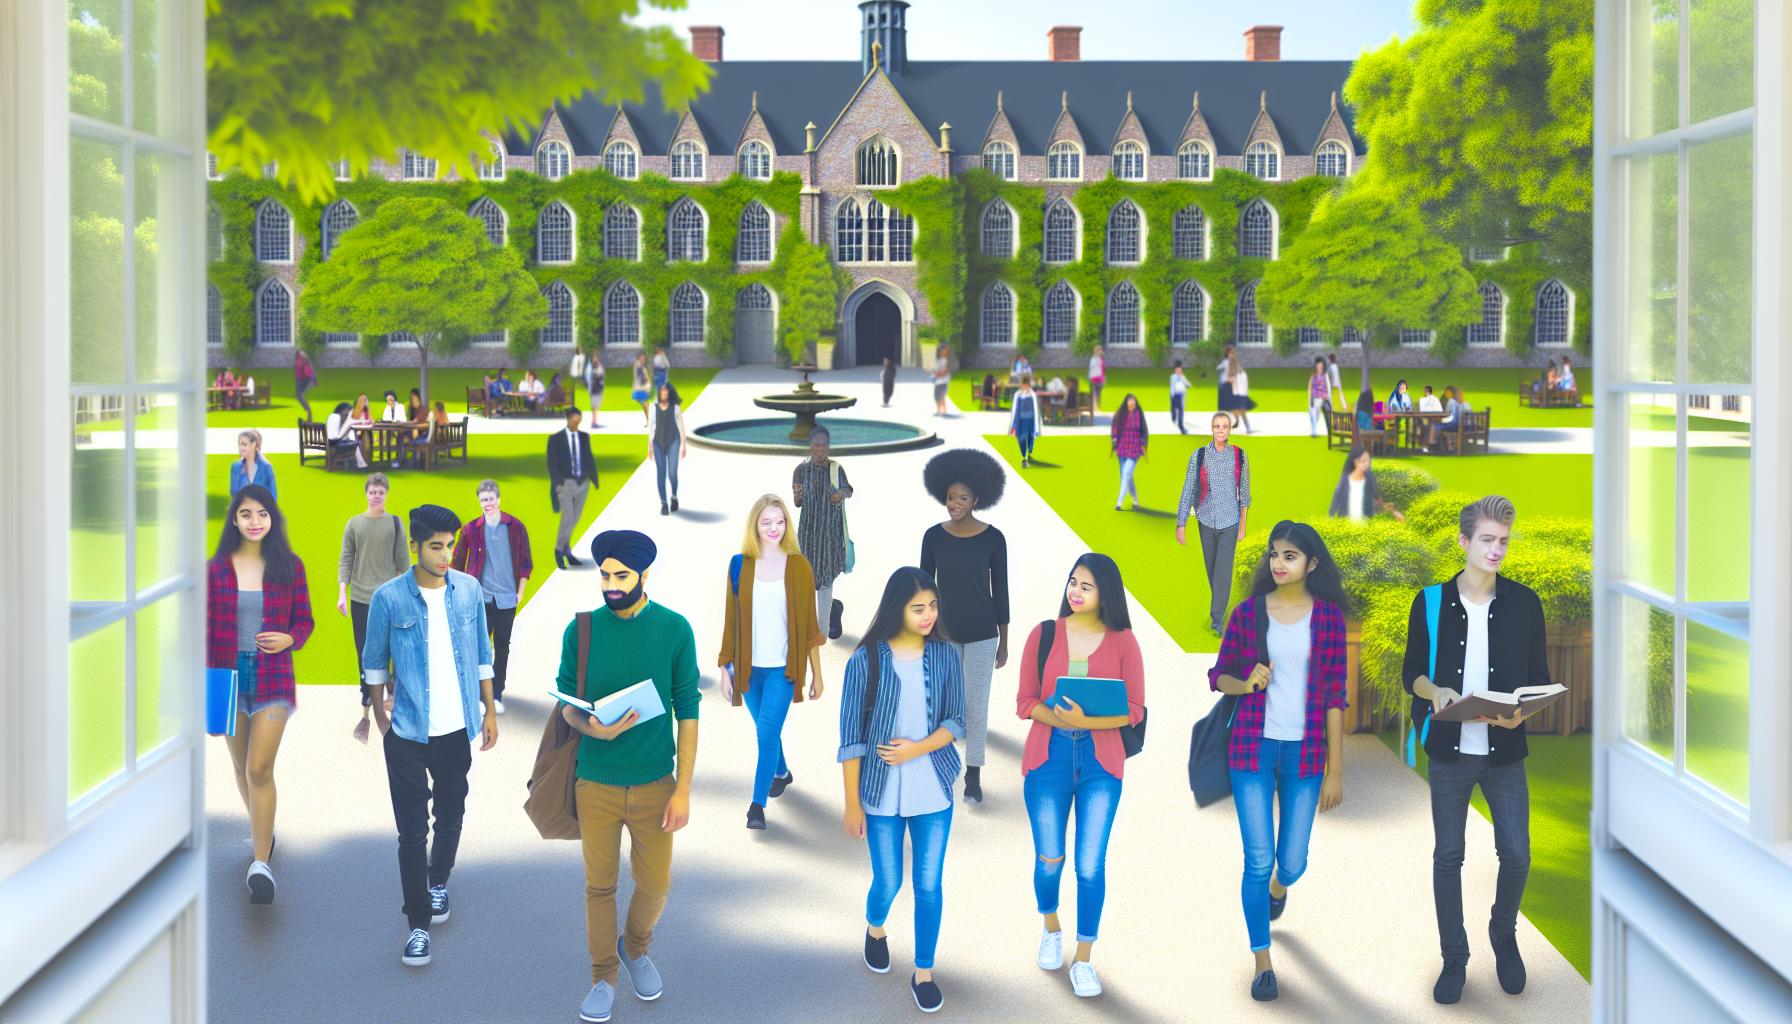 An image of a college campus with wellmaintained buildings and grounds, showing students walking between classes and enjoying the environment